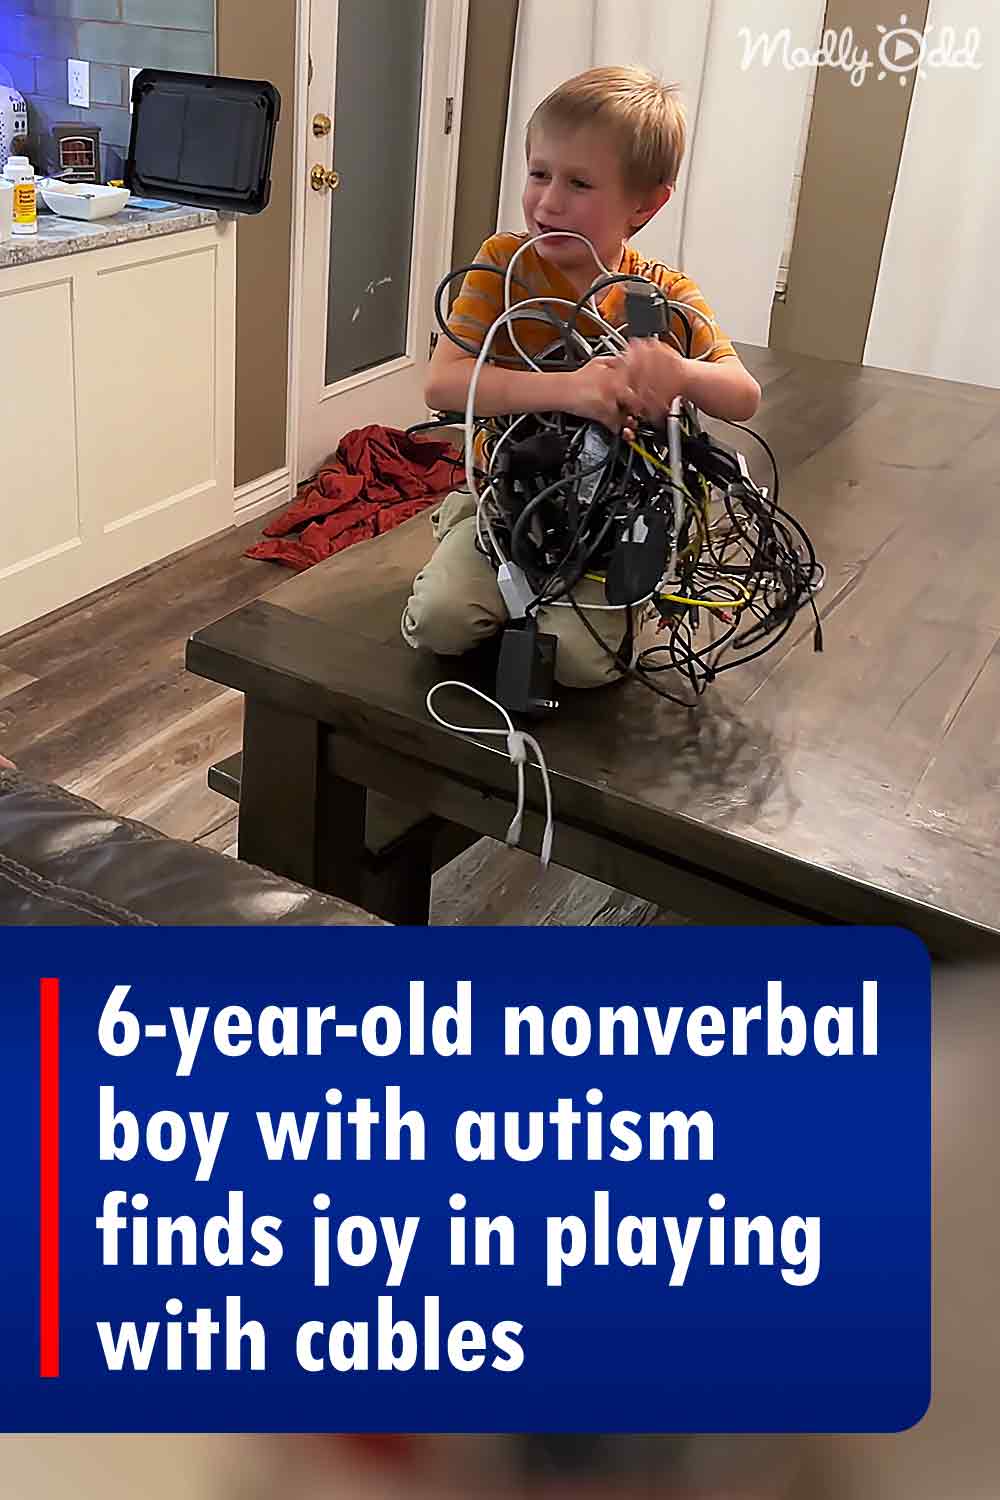 6-year-old nonverbal boy with autism finds joy in playing with cables